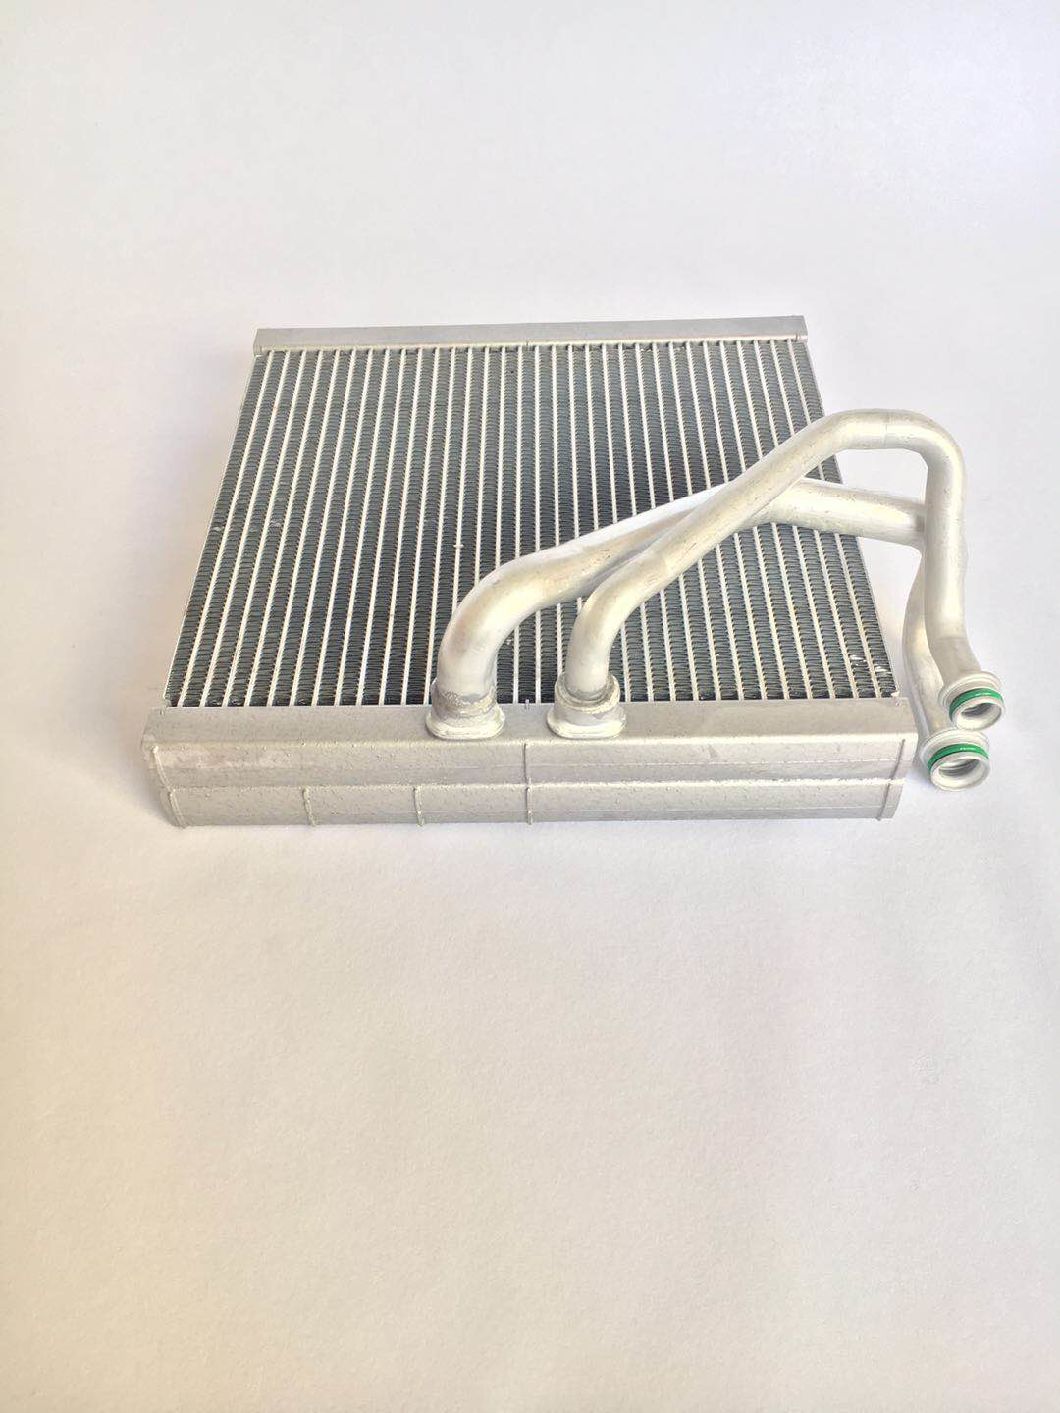 China Aluminum Car Radiator Factory for Auto Cooling System